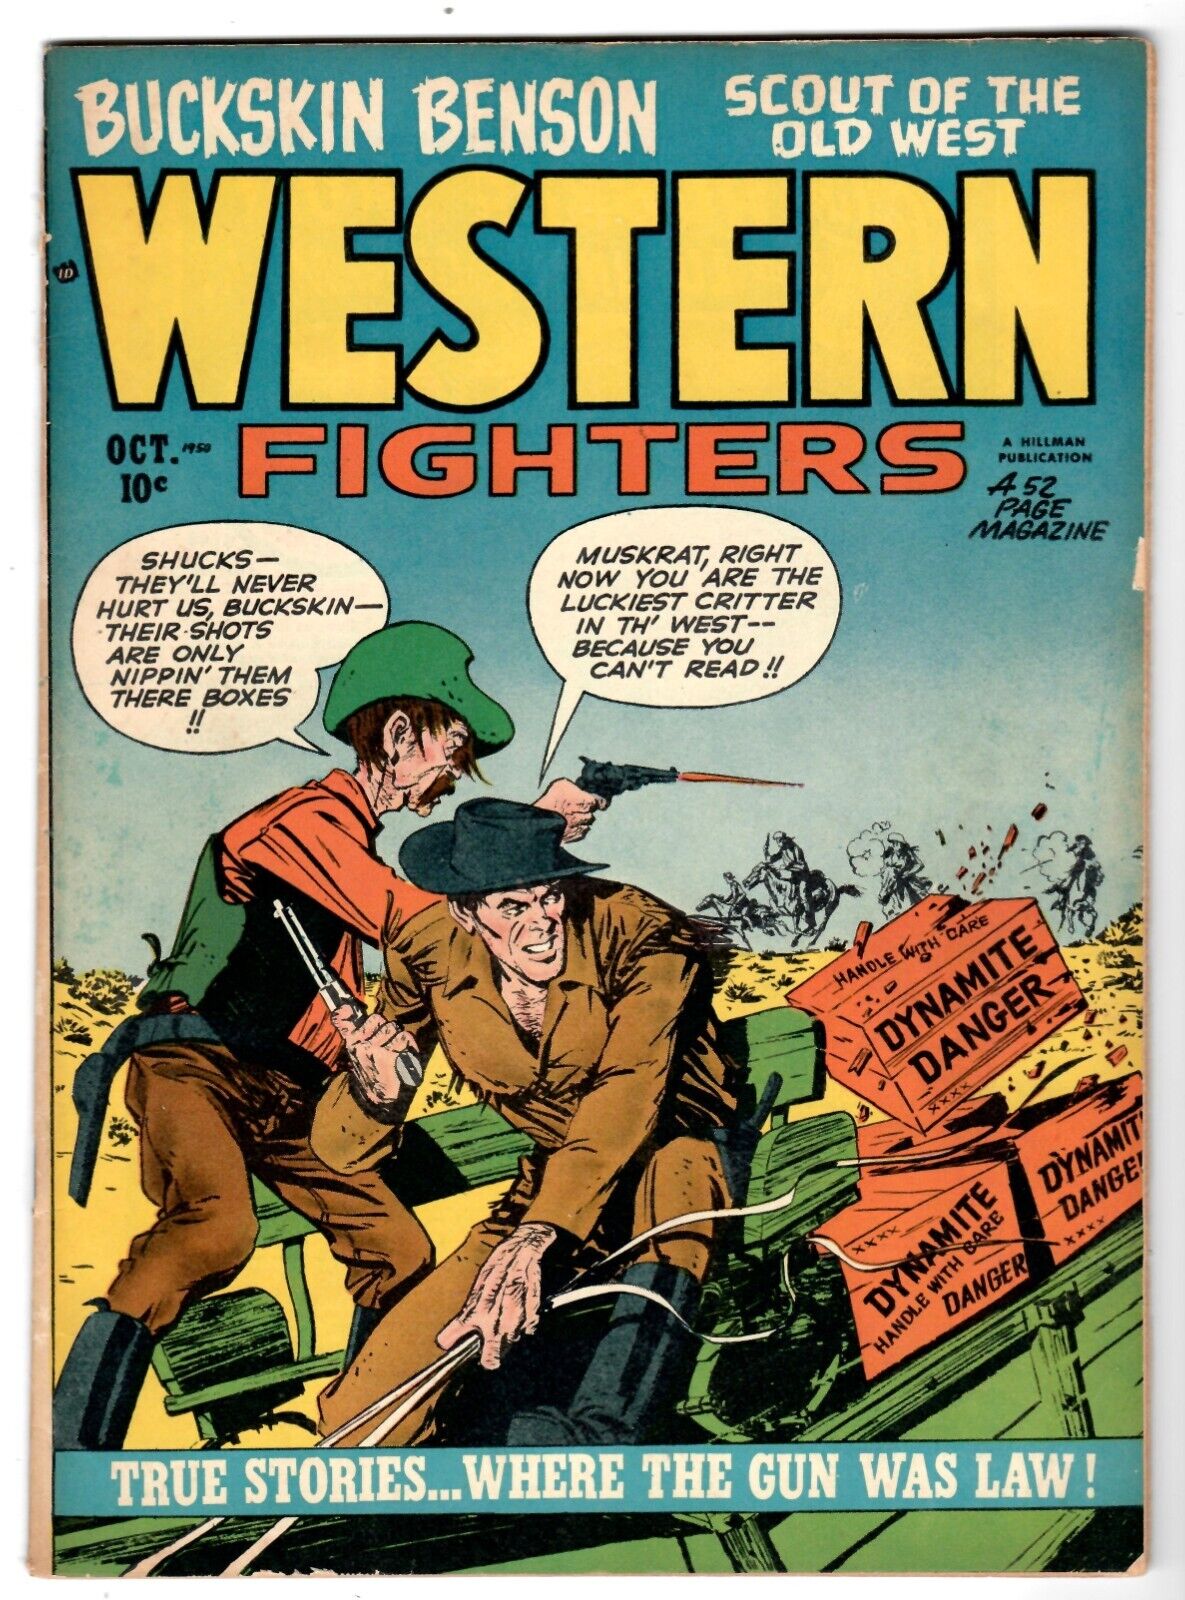 Western Fighters Vol. 2 #11 (1950) Hillman Periodicals Very Good